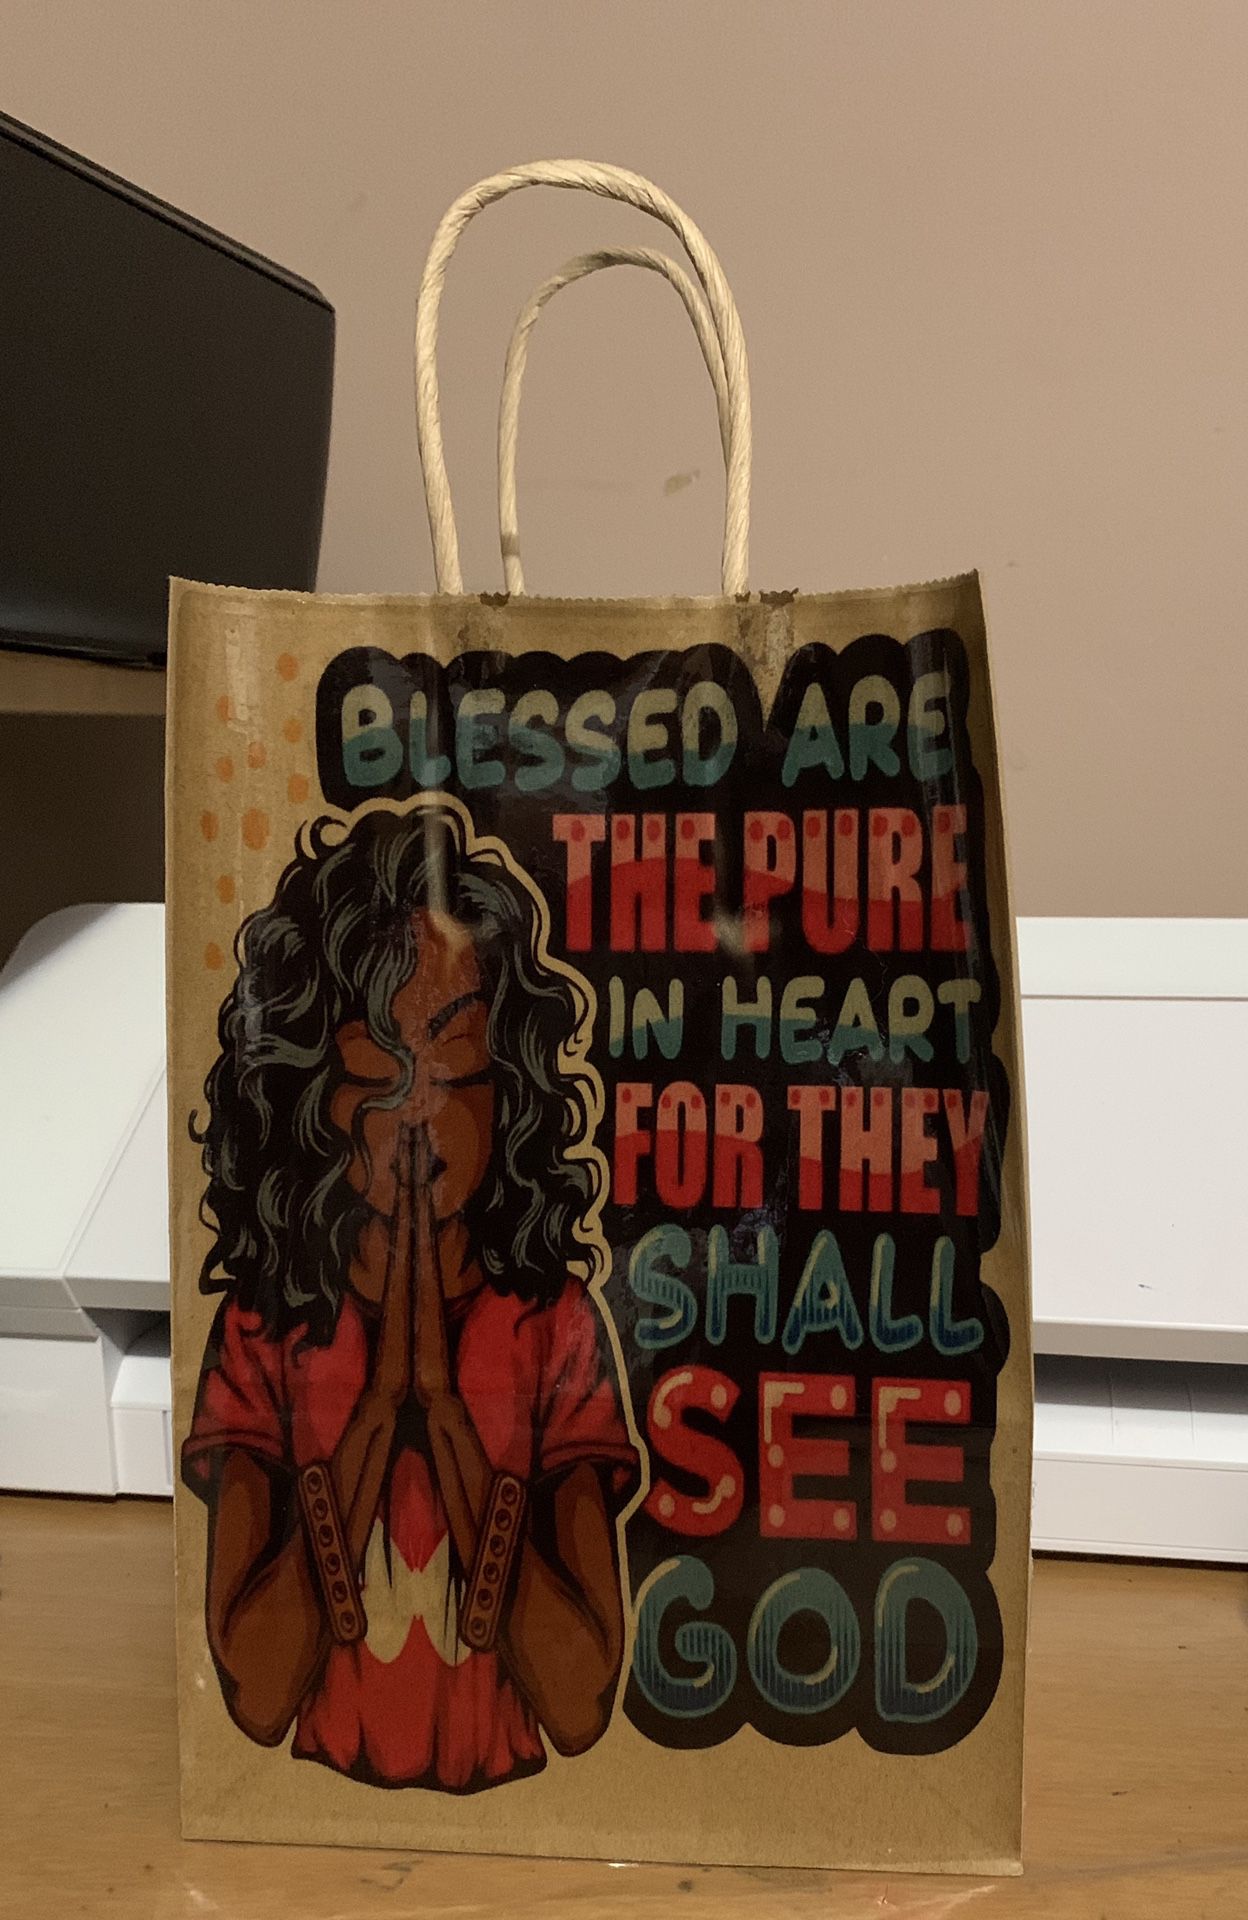 Personalized gift bag